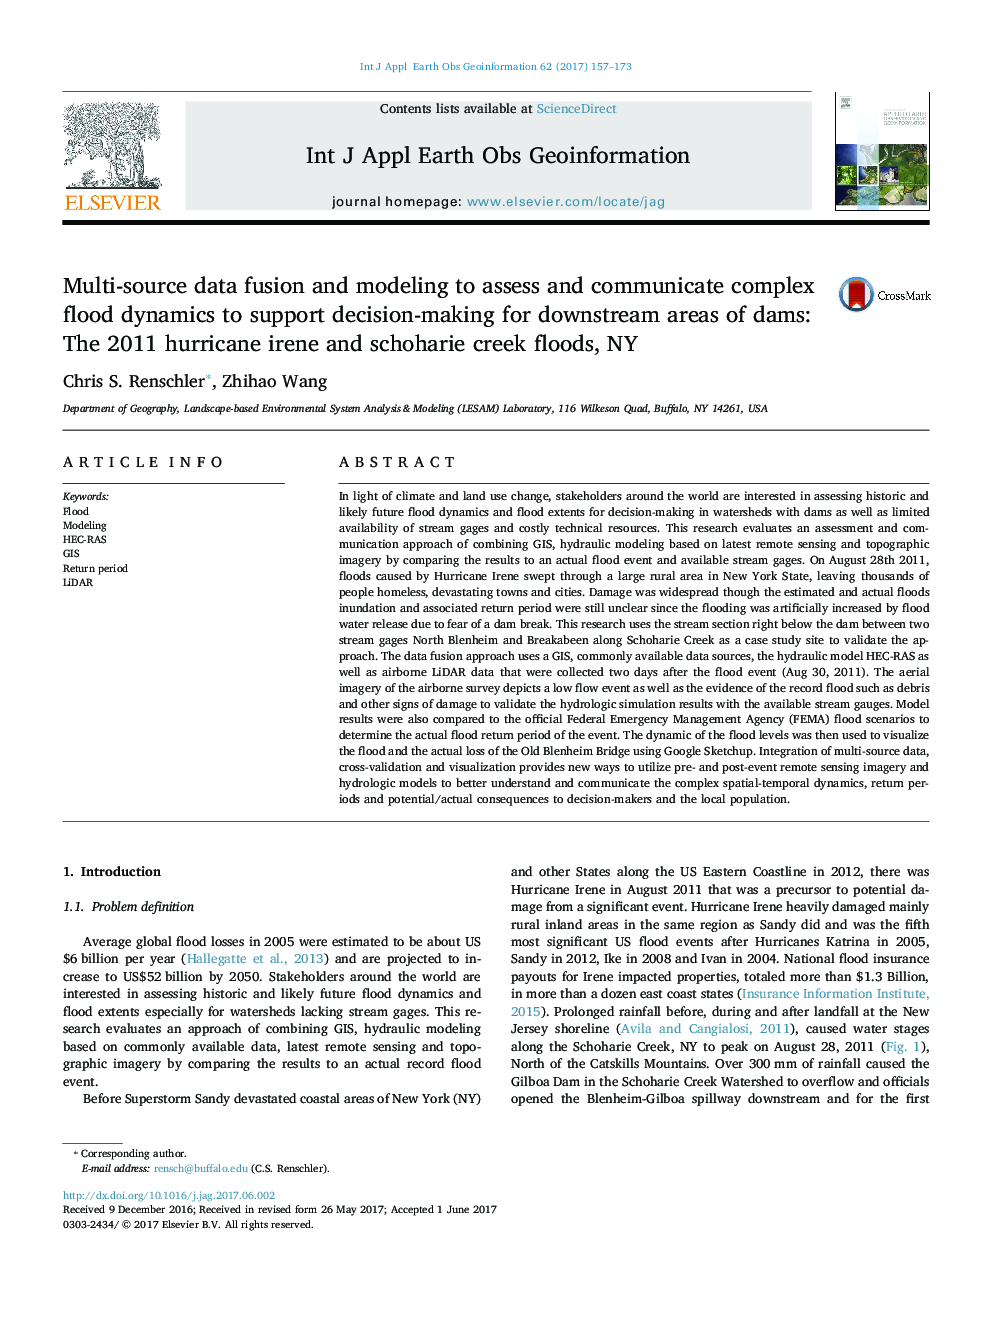 Multi-source data fusion and modeling to assess and communicate complex flood dynamics to support decision-making for downstream areas of dams: The 2011 hurricane irene and schoharie creek floods, NY